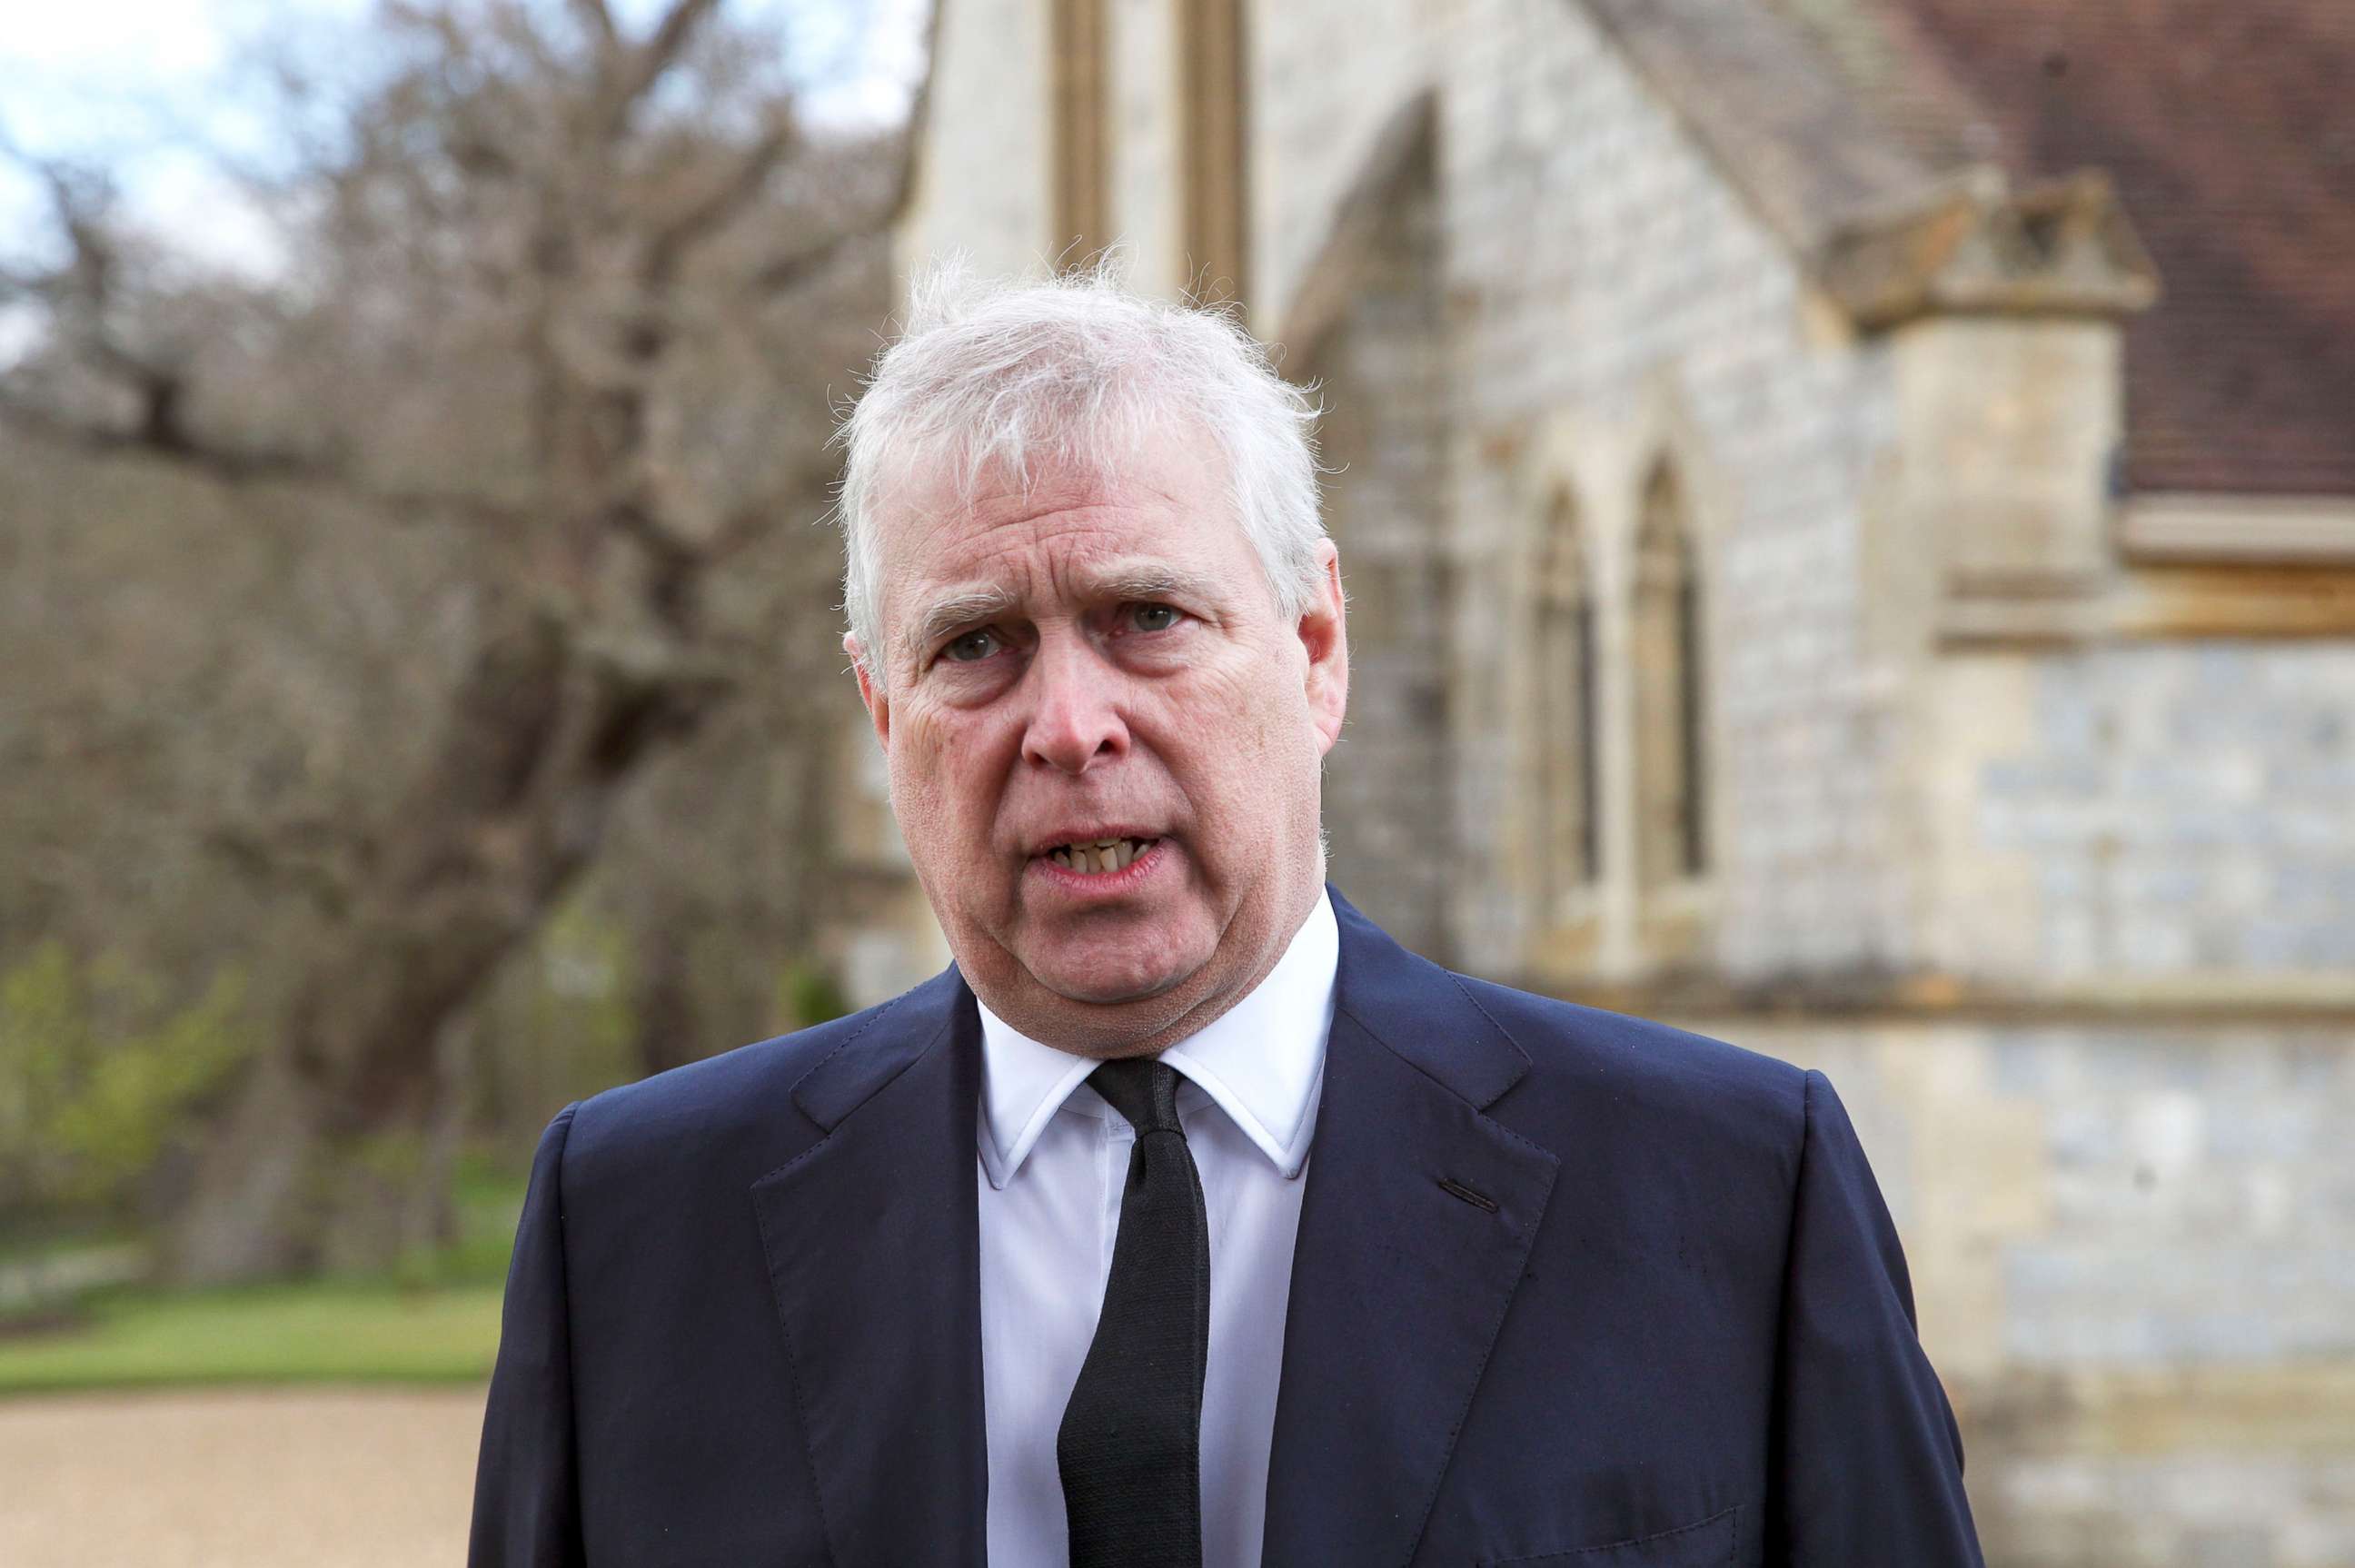 British court indicates it will serve lawsuit on Prince Andrew pic